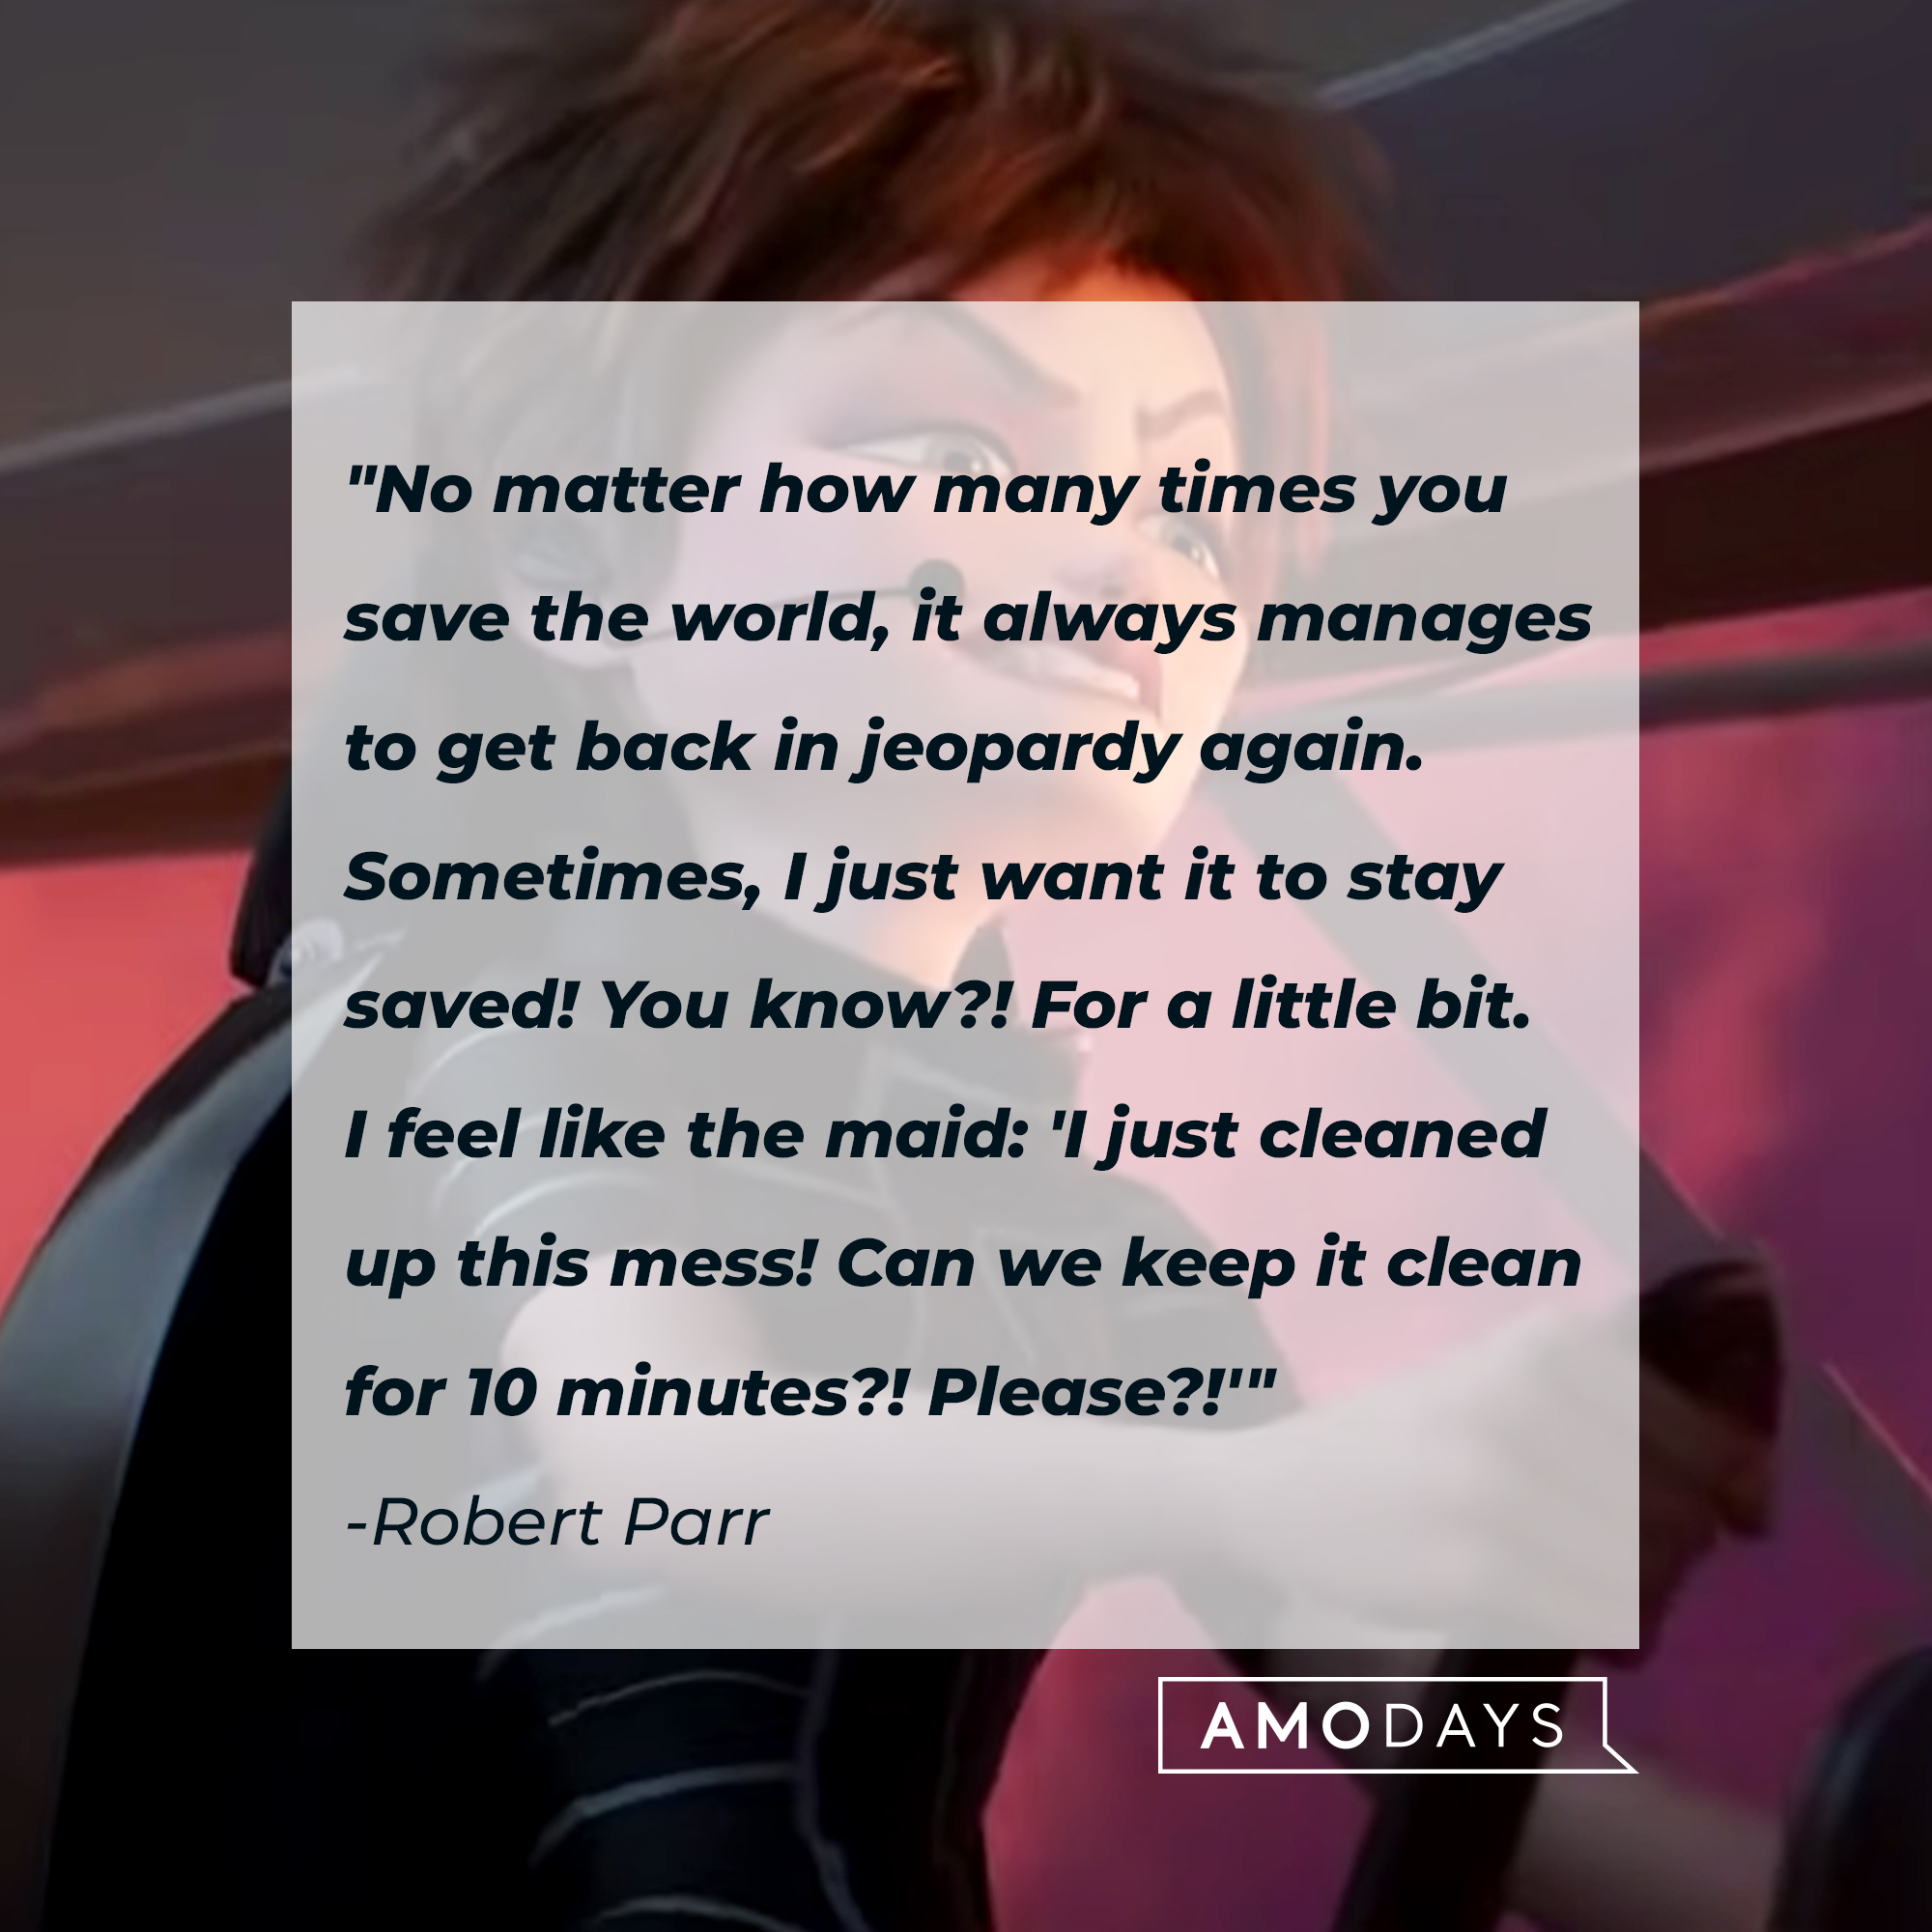 Robert Parr and his quote: "No matter how many times you save the world, it always manages to get back in jeopardy again. Sometimes, I just want it to stay saved! You know?! For a little bit. I feel like the maid [...]'" | Source: Youtube/pixar